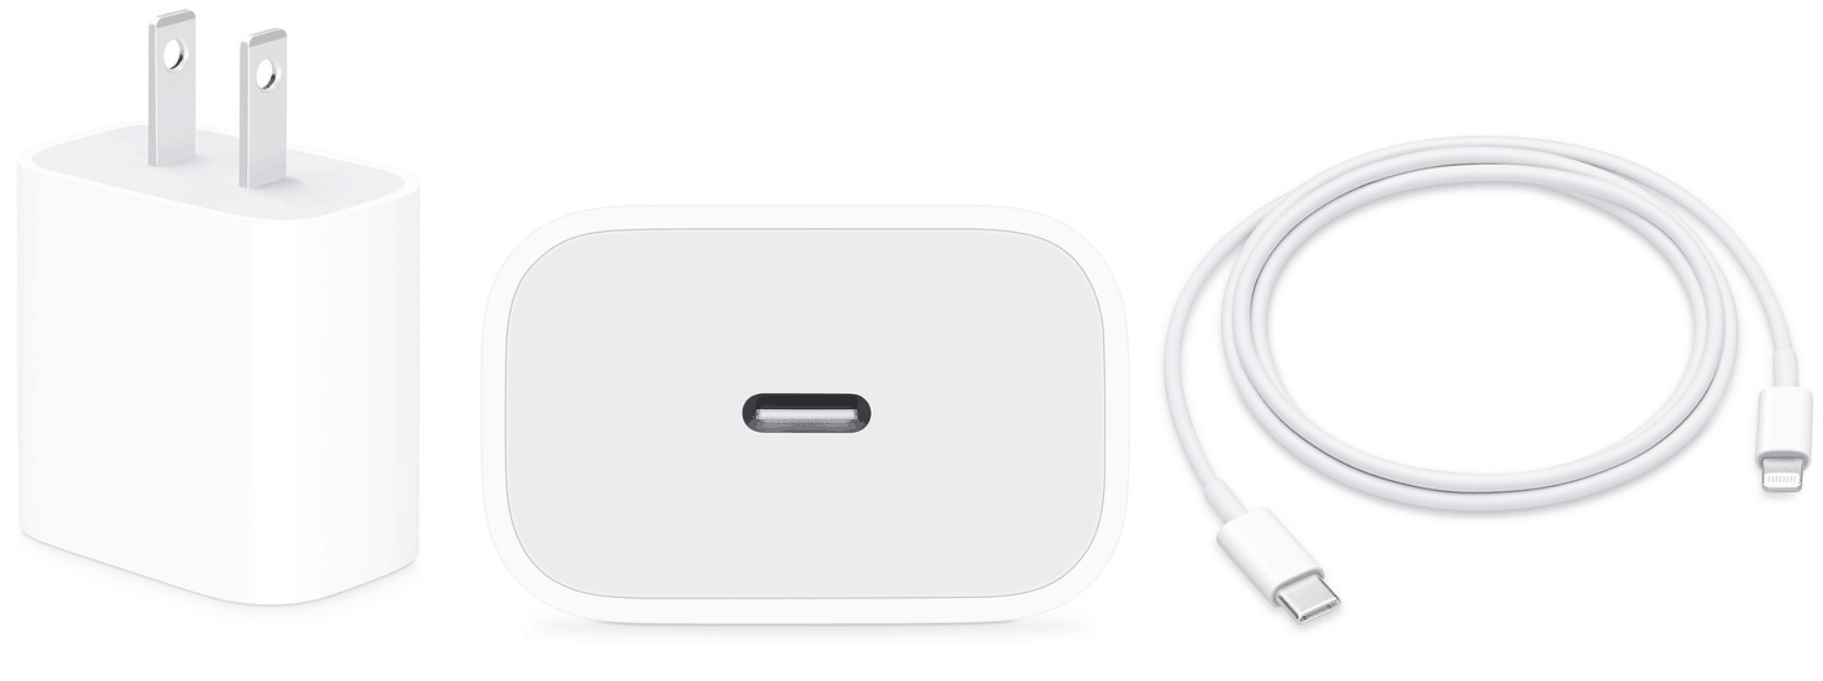 Максимальная зарядка iphone. Apple USB-C 20w Power Adapter. 20w USB-C Power Adapter USB-C to Lightning Cable. Iphone 14 Pro Max 20w USB-C Power Adapter USB-C to Lightning Cable. Iphone 13 Pro Max 20w USB-C Power Adapter USB-C to Lightning Cable.